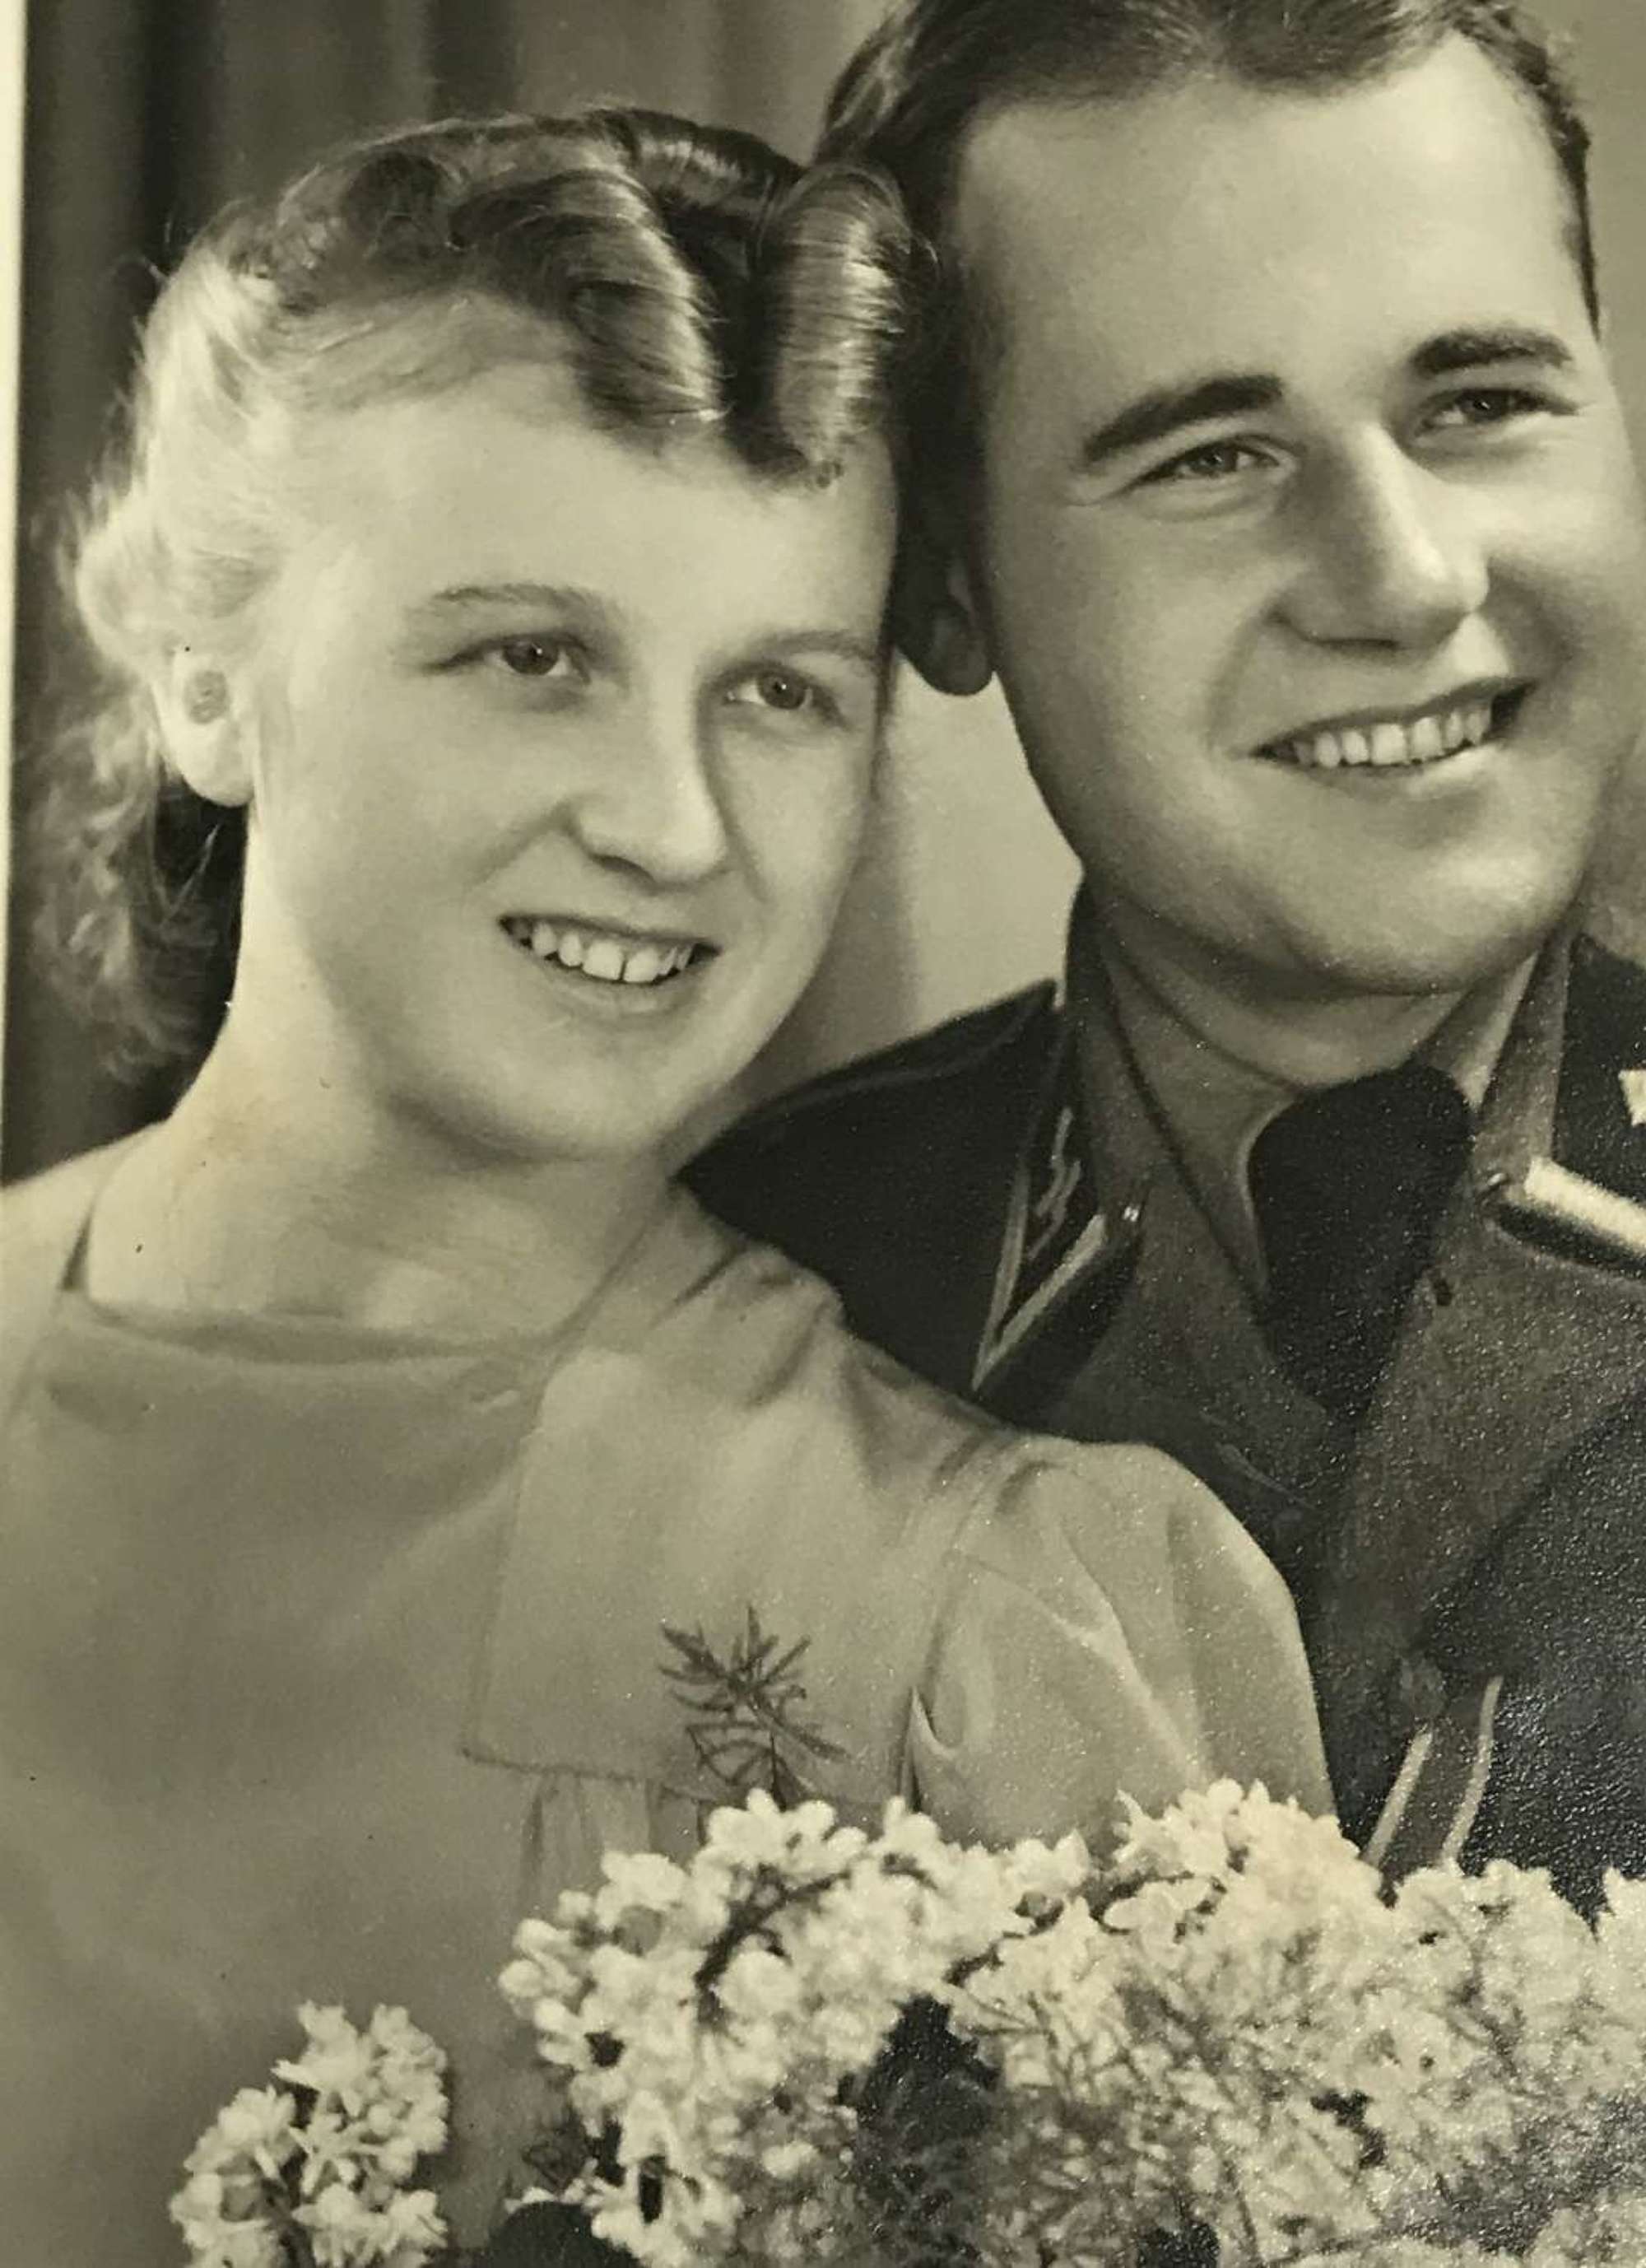 Postcard of SS wedding couple dated 1943